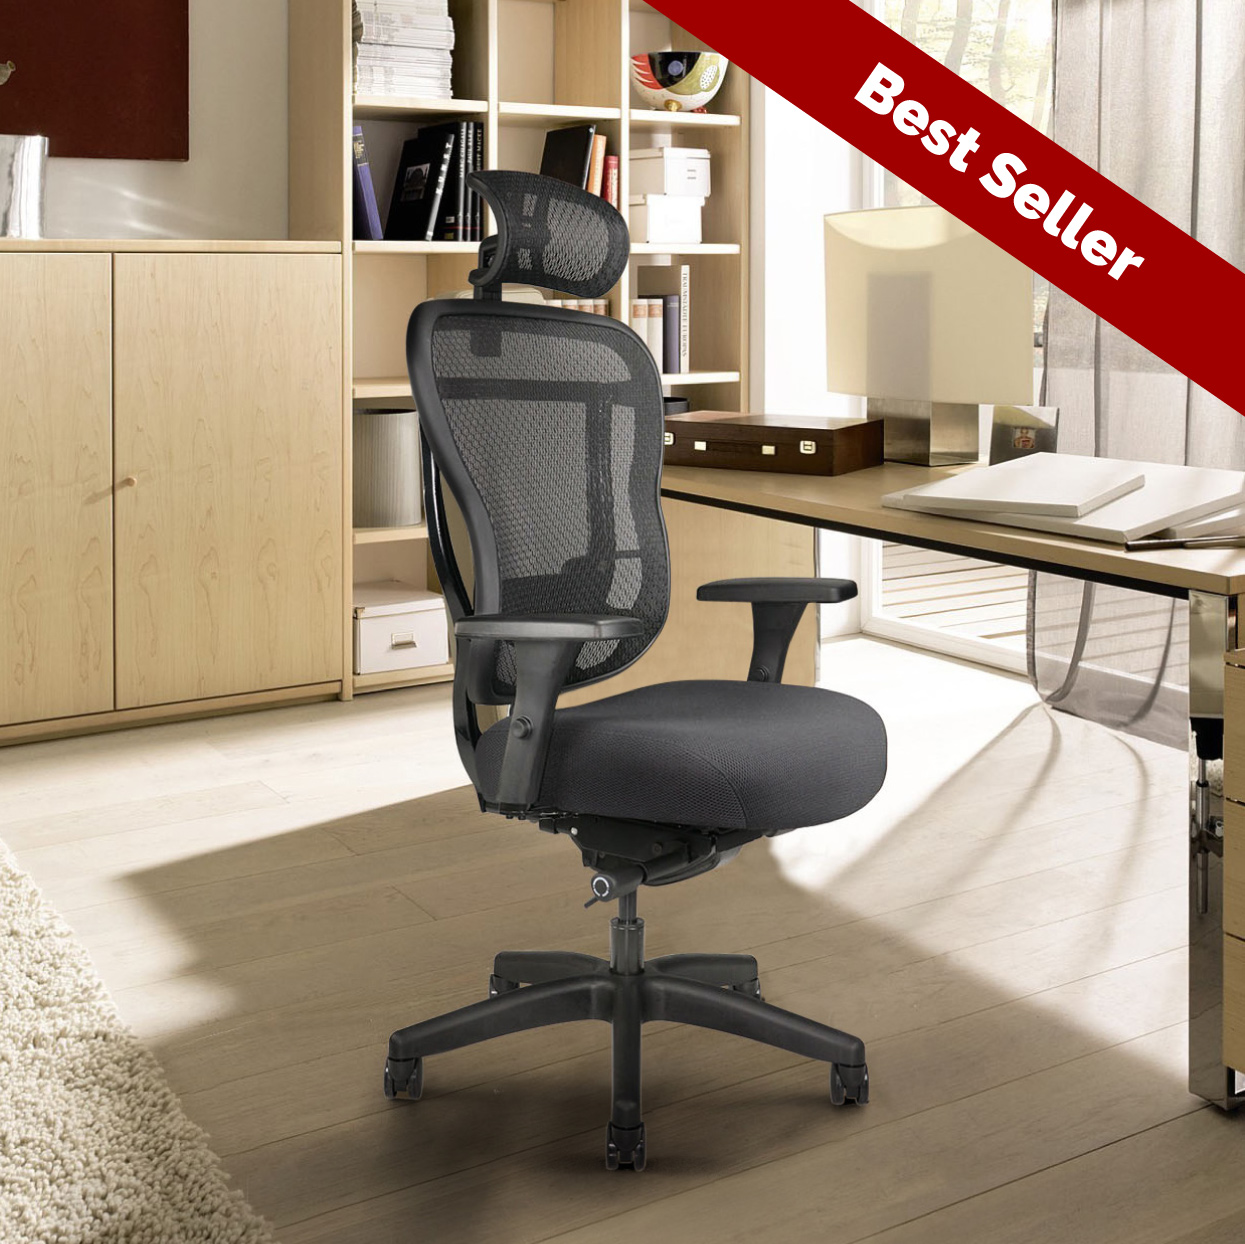 Best-Selling Rika Chair by Buzz Seating